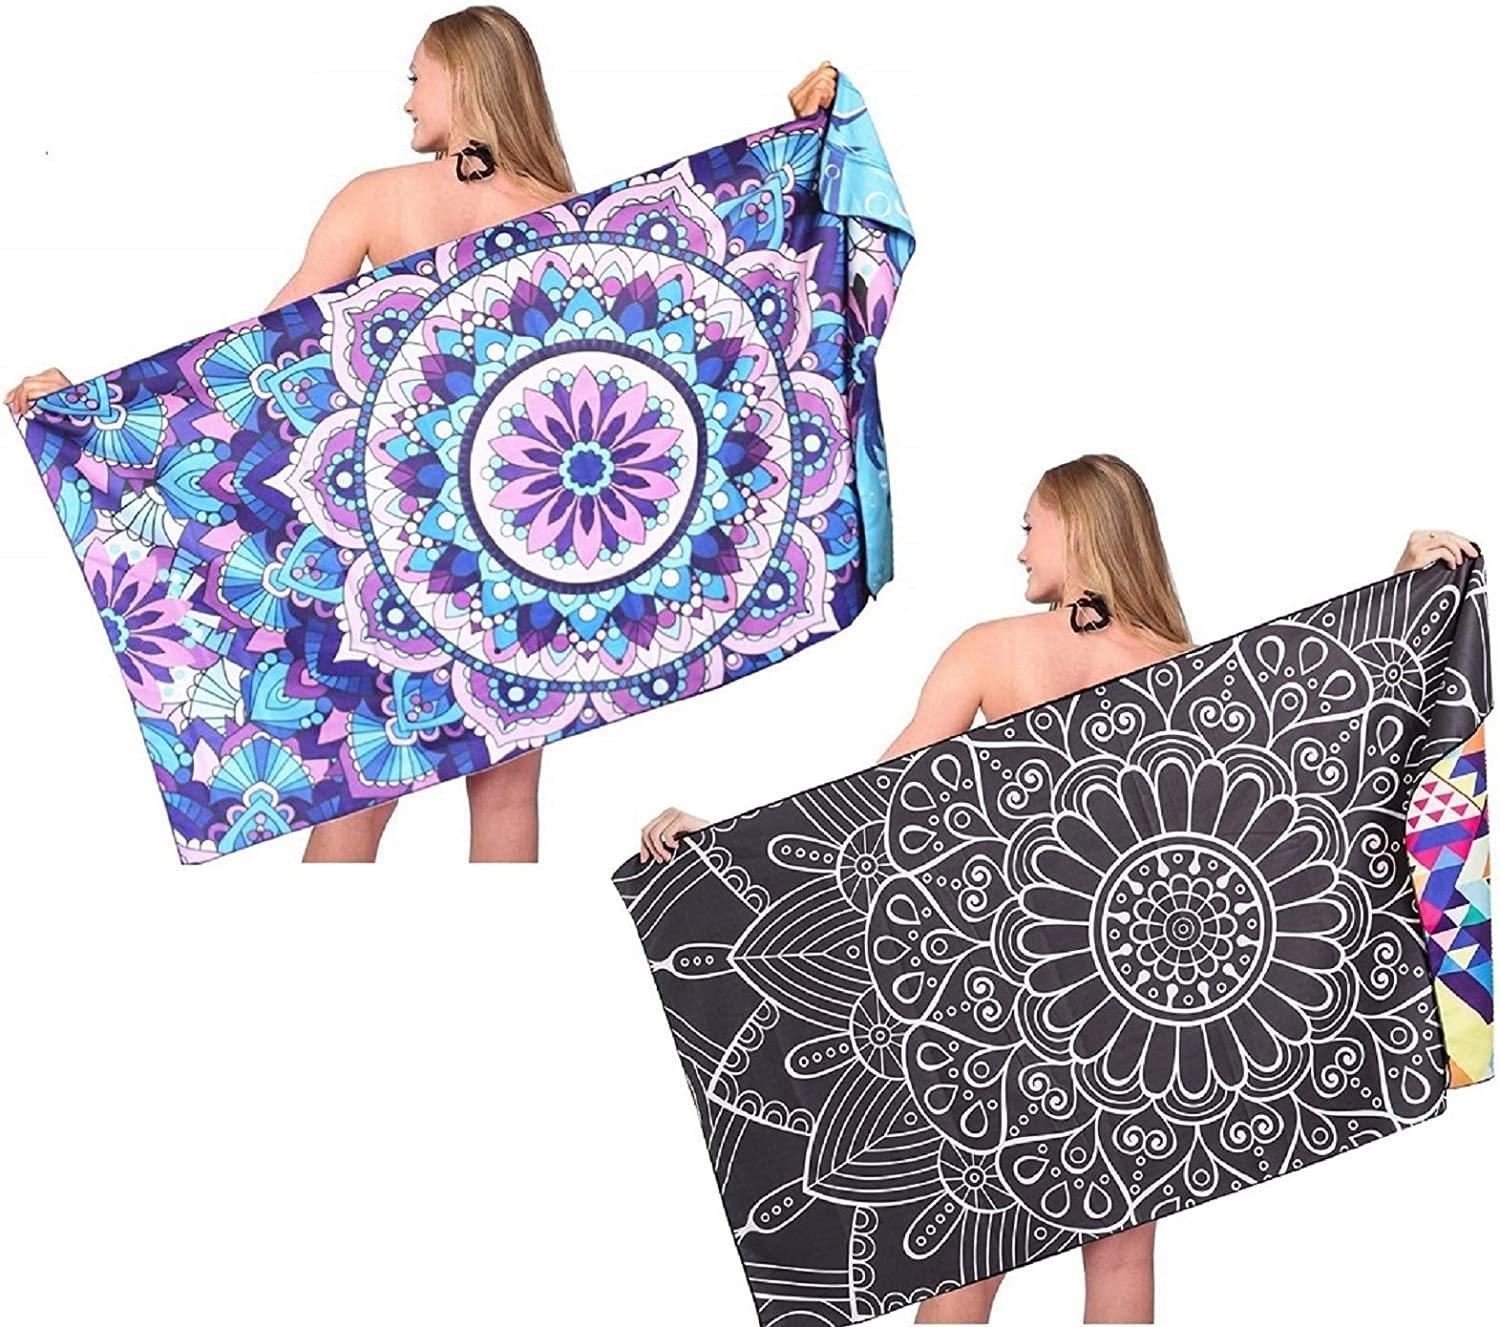 Sand Free Travel Beach Towel Blanket Quick Fast Dry Super Absorbent Lightweight Thin Microfiber Towels for Pool Swimming Bath Camping Yoga Gym Bohemian Black and Blue Mandala 2 Packs